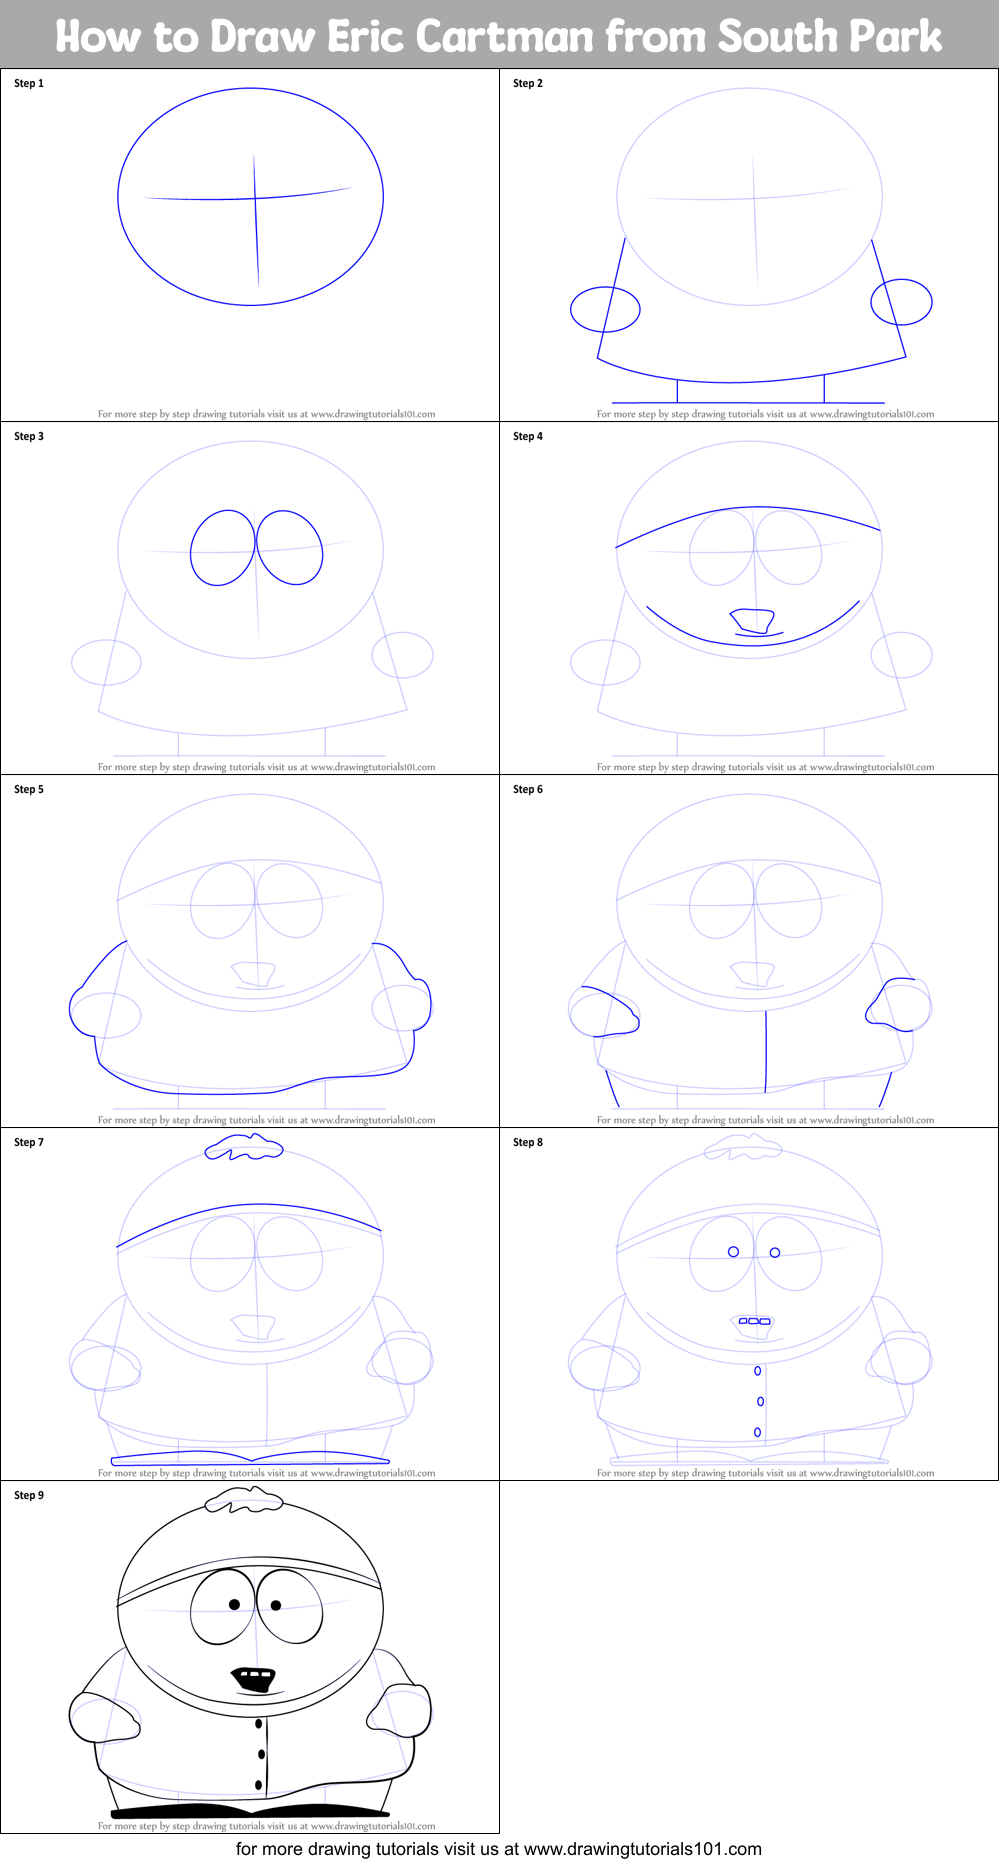 How to Draw Eric Cartman from South Park printable step by step drawing